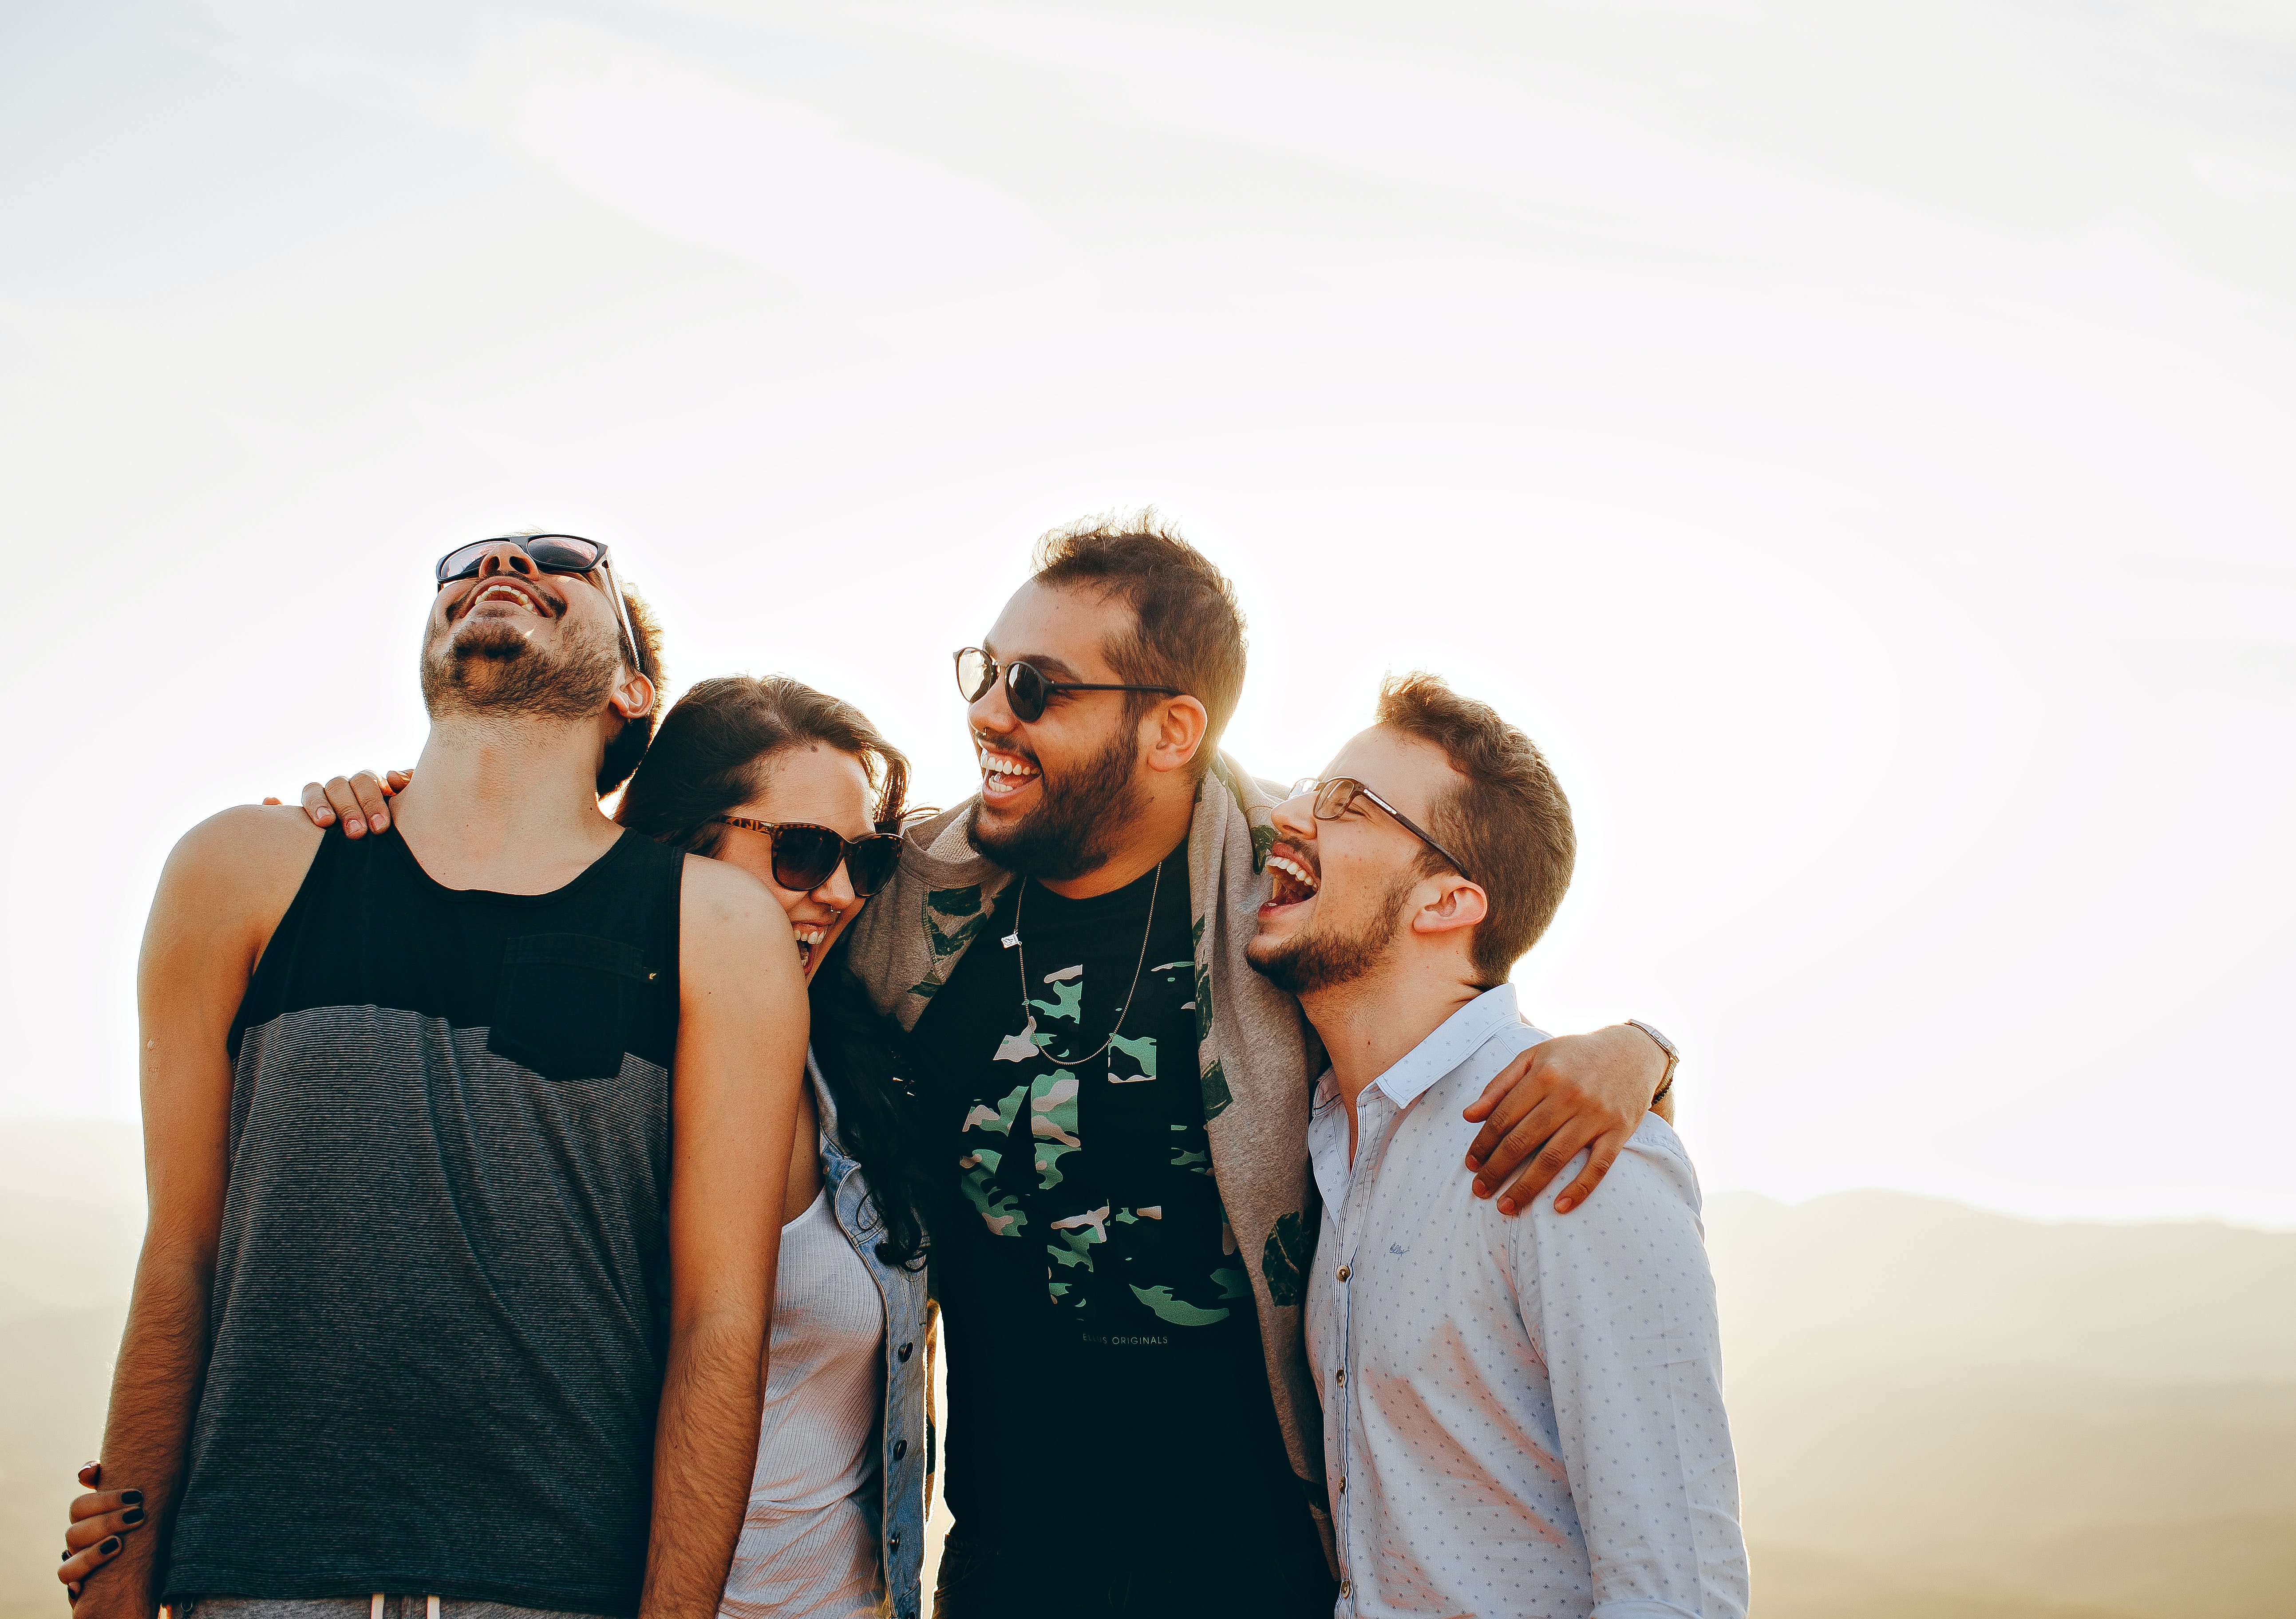 Individuals laughing together │Source: Pexels